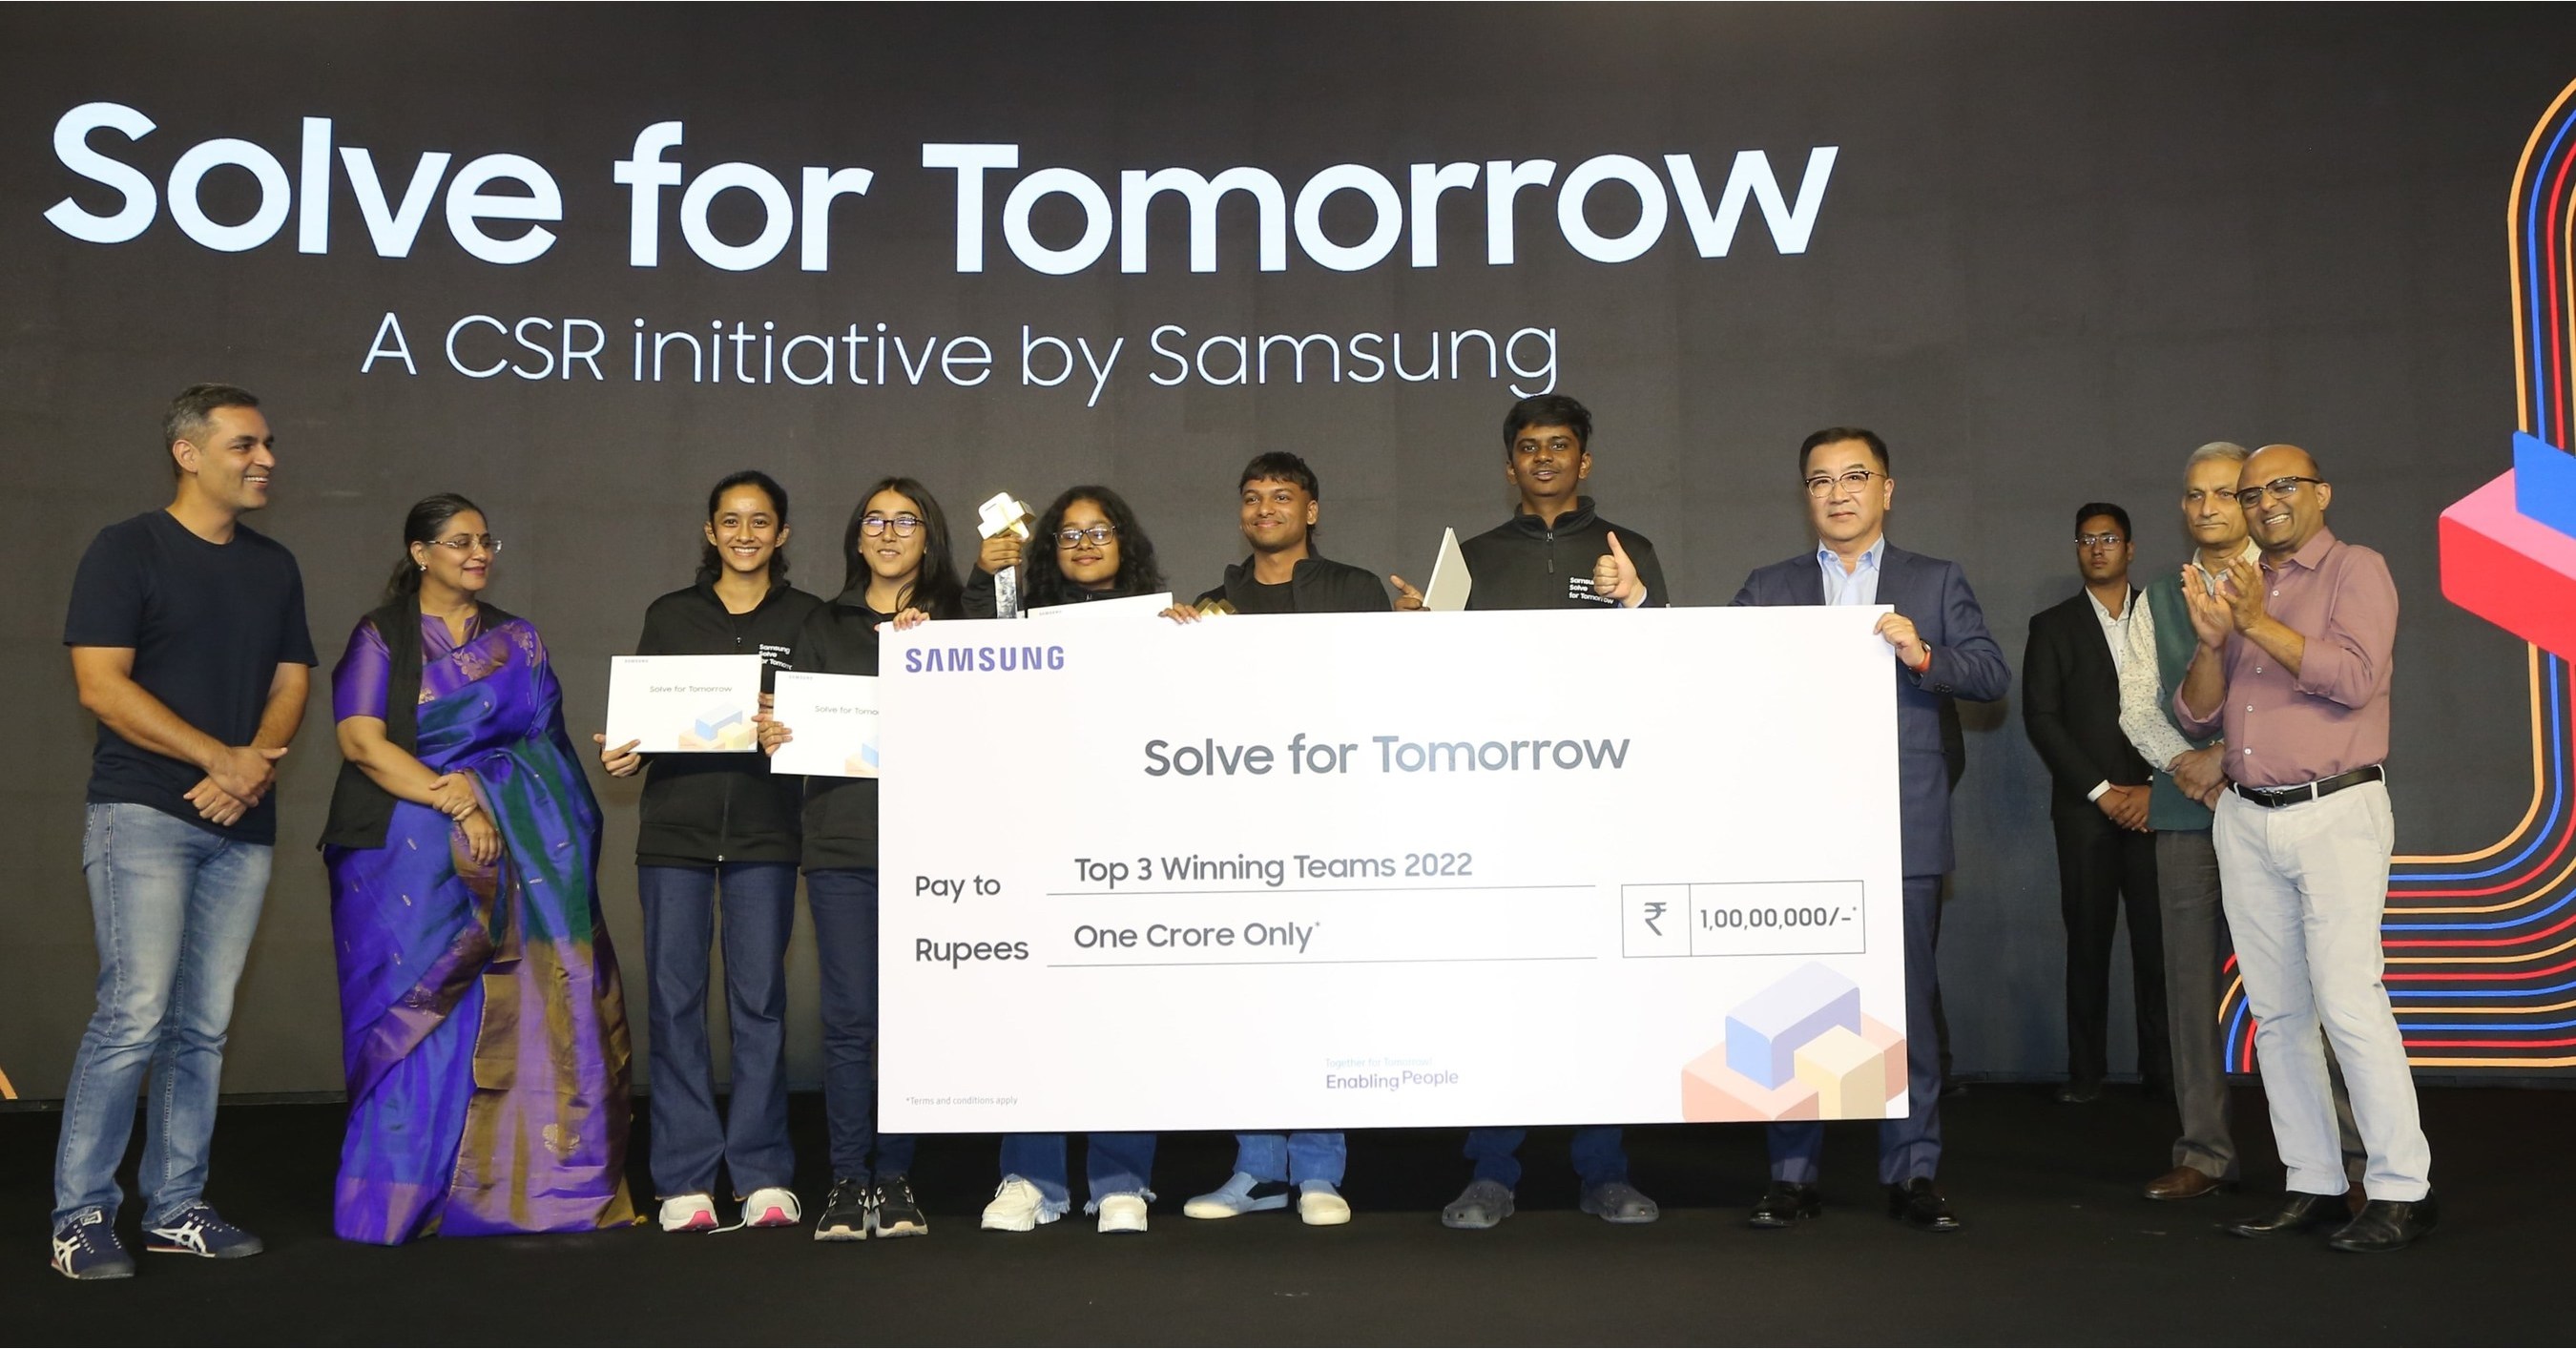 Samsung Announces Top 3 Winners of Solve for Tomorrow 2022, who